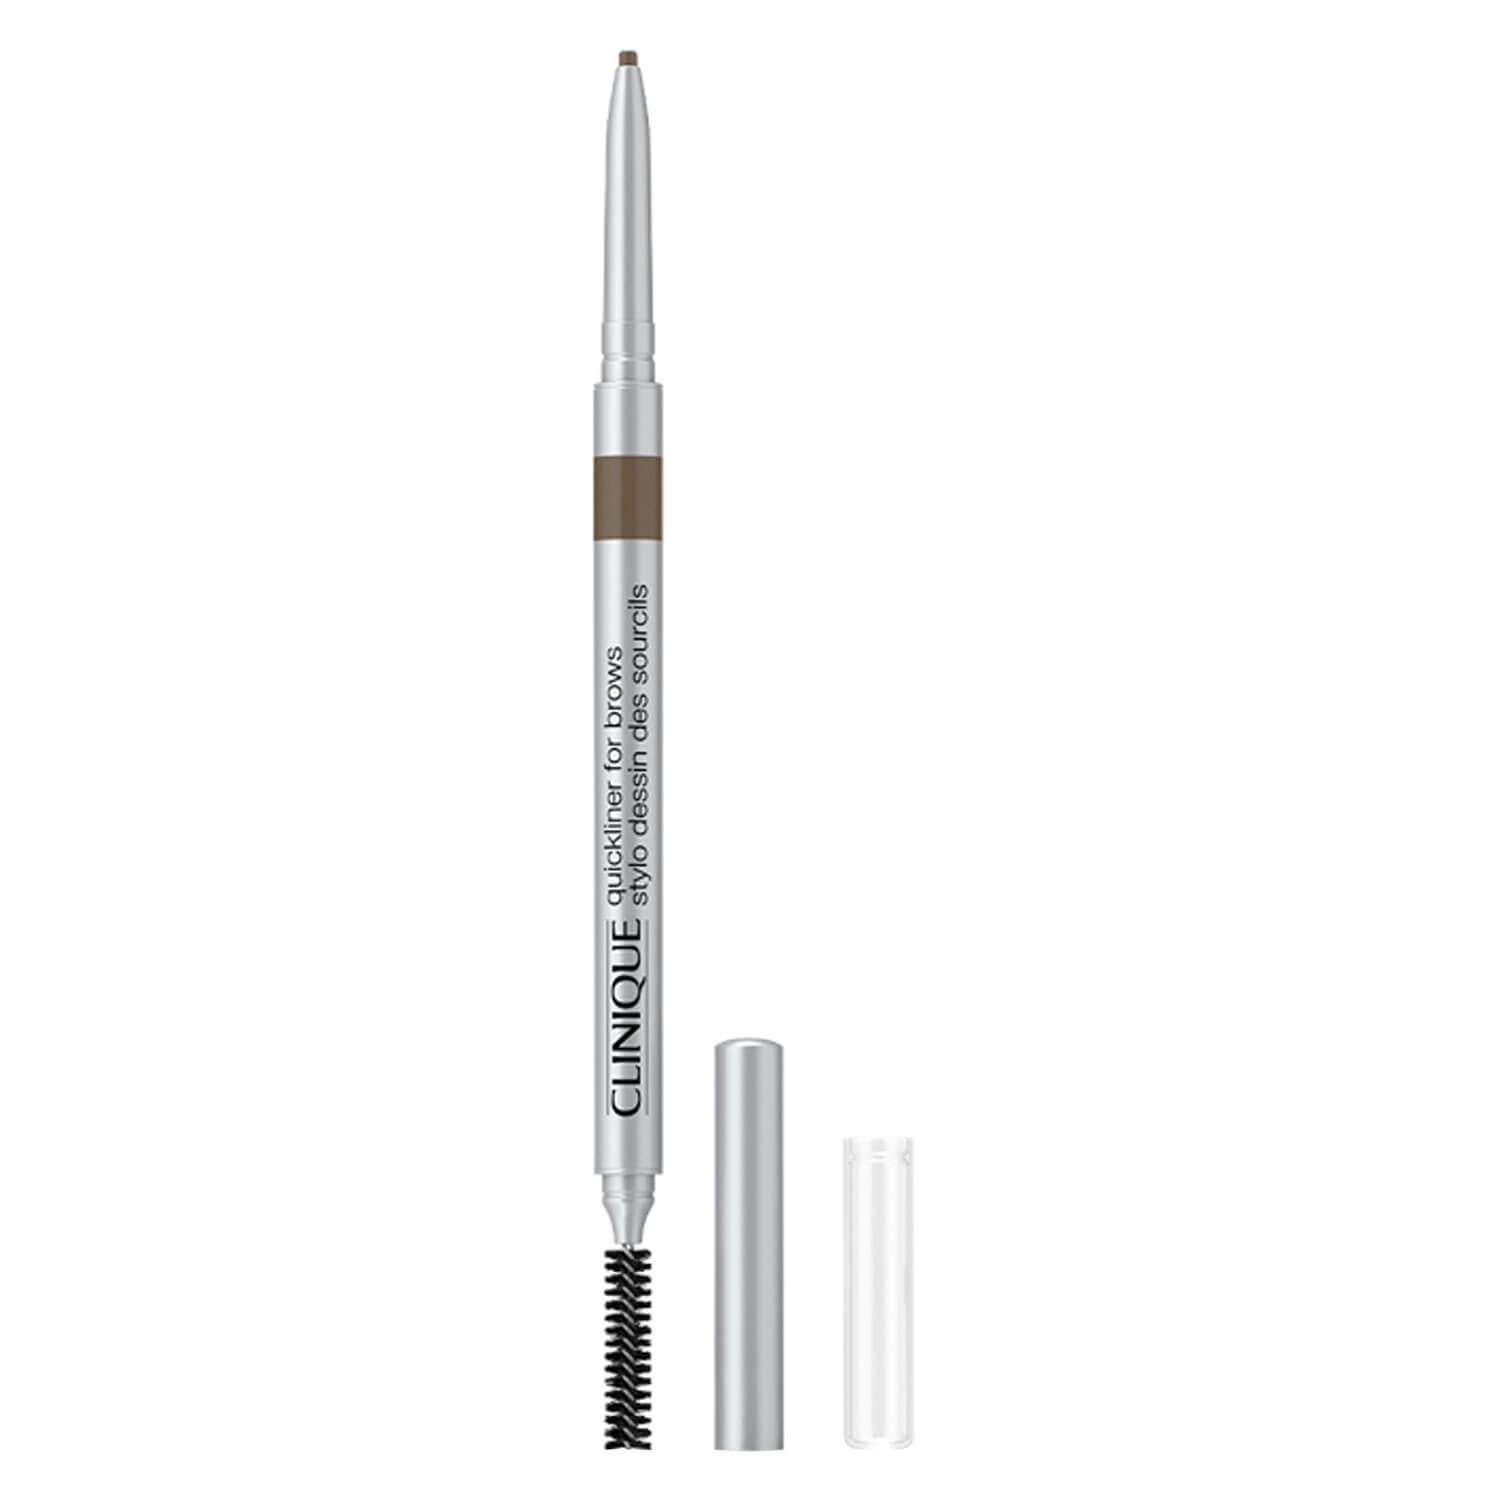 Quickliner For Brows - 03 Soft Brown